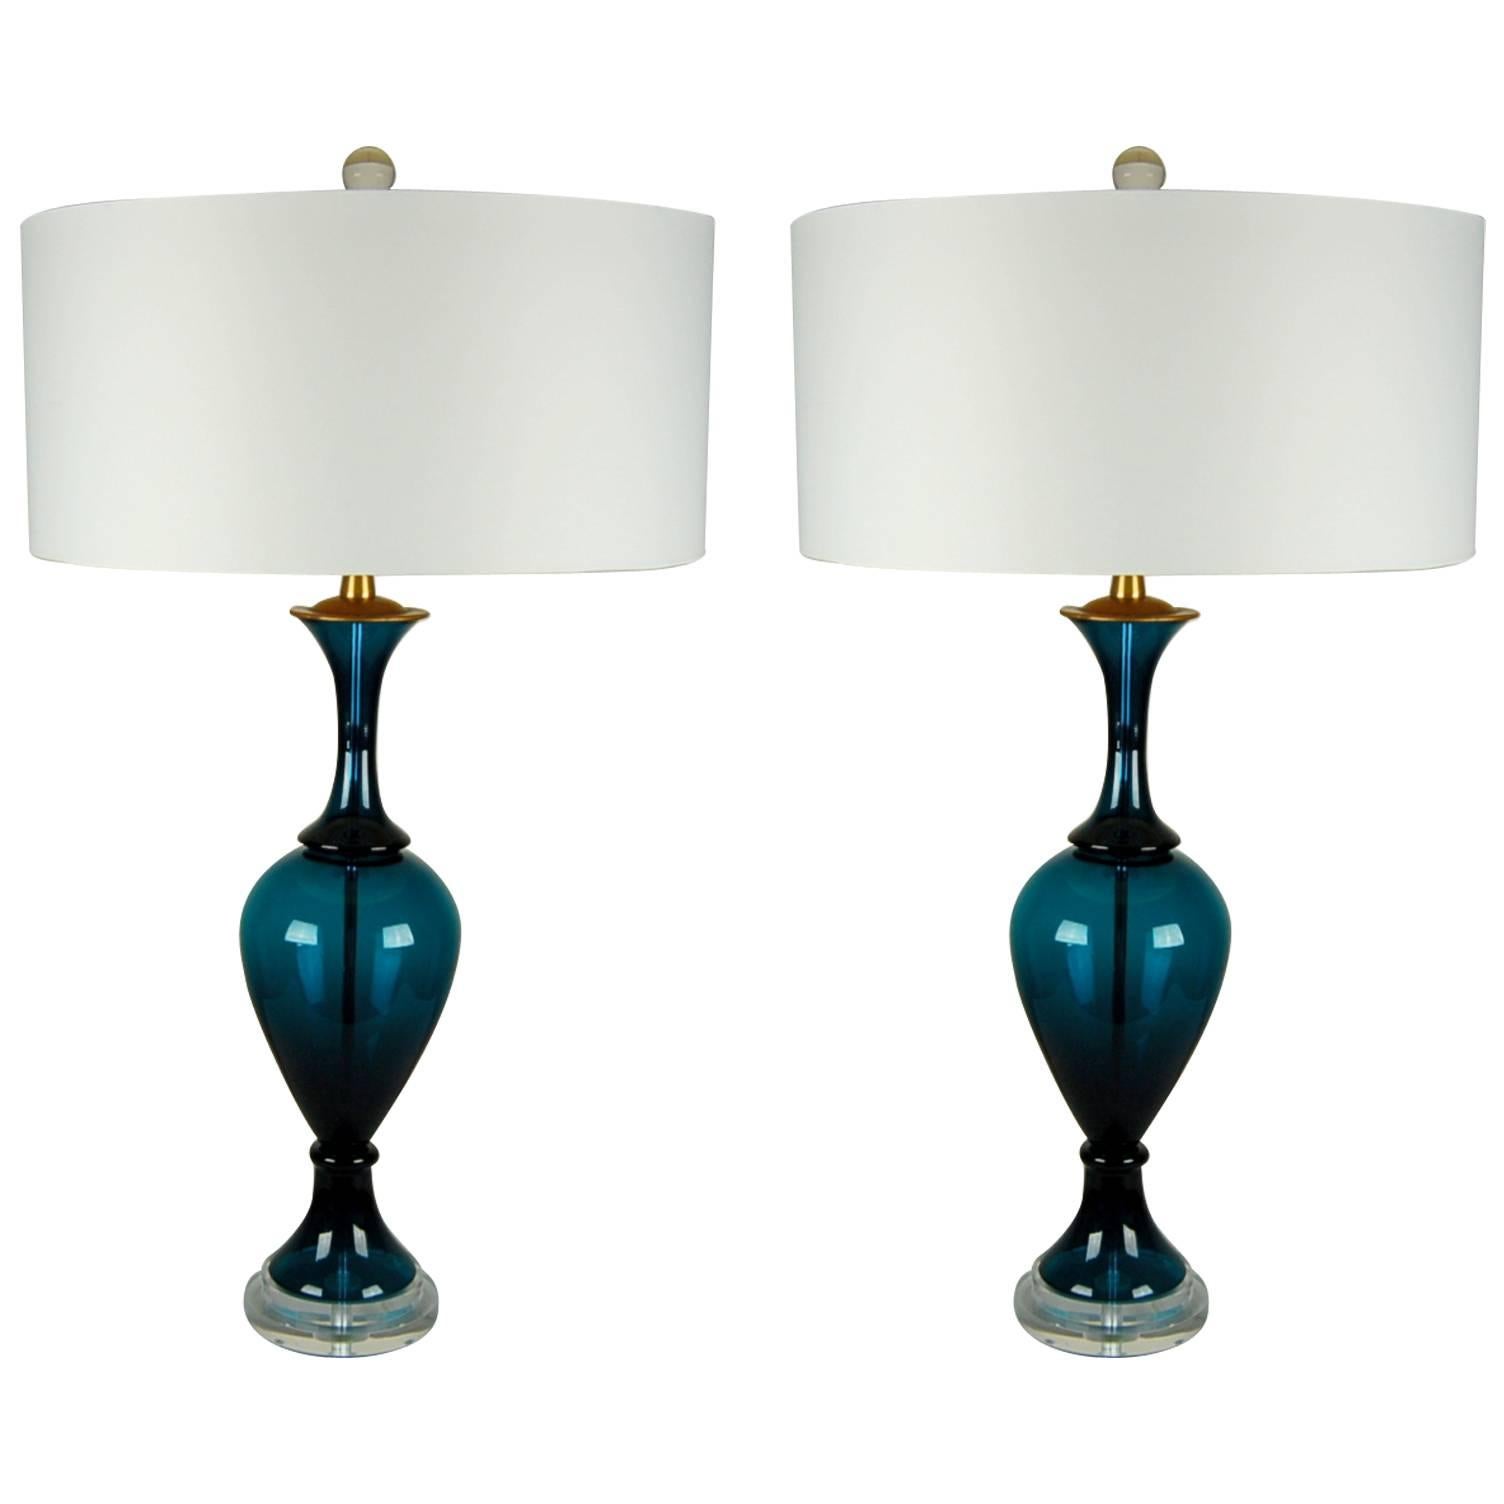 Matched Pair of Vintage Murano Lamps by Marbro in Teal